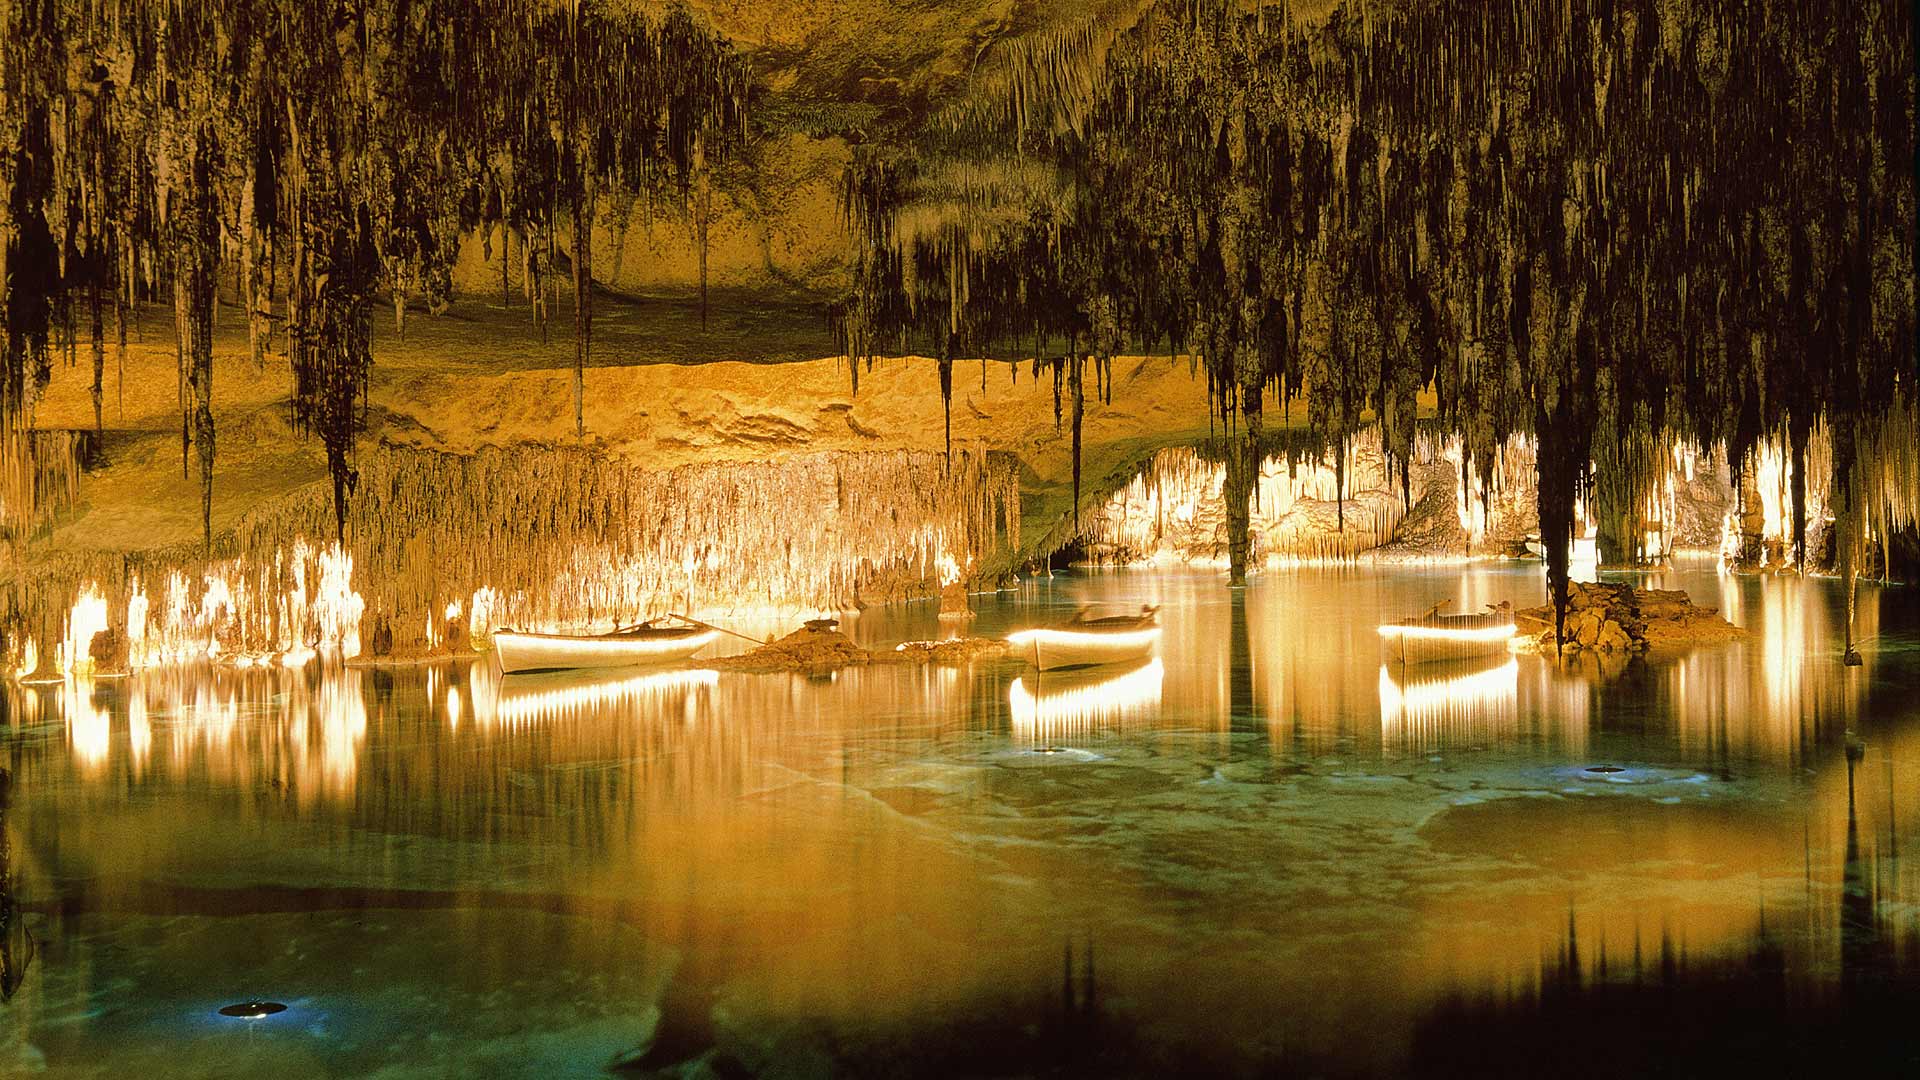 The unusual caves of Majorca